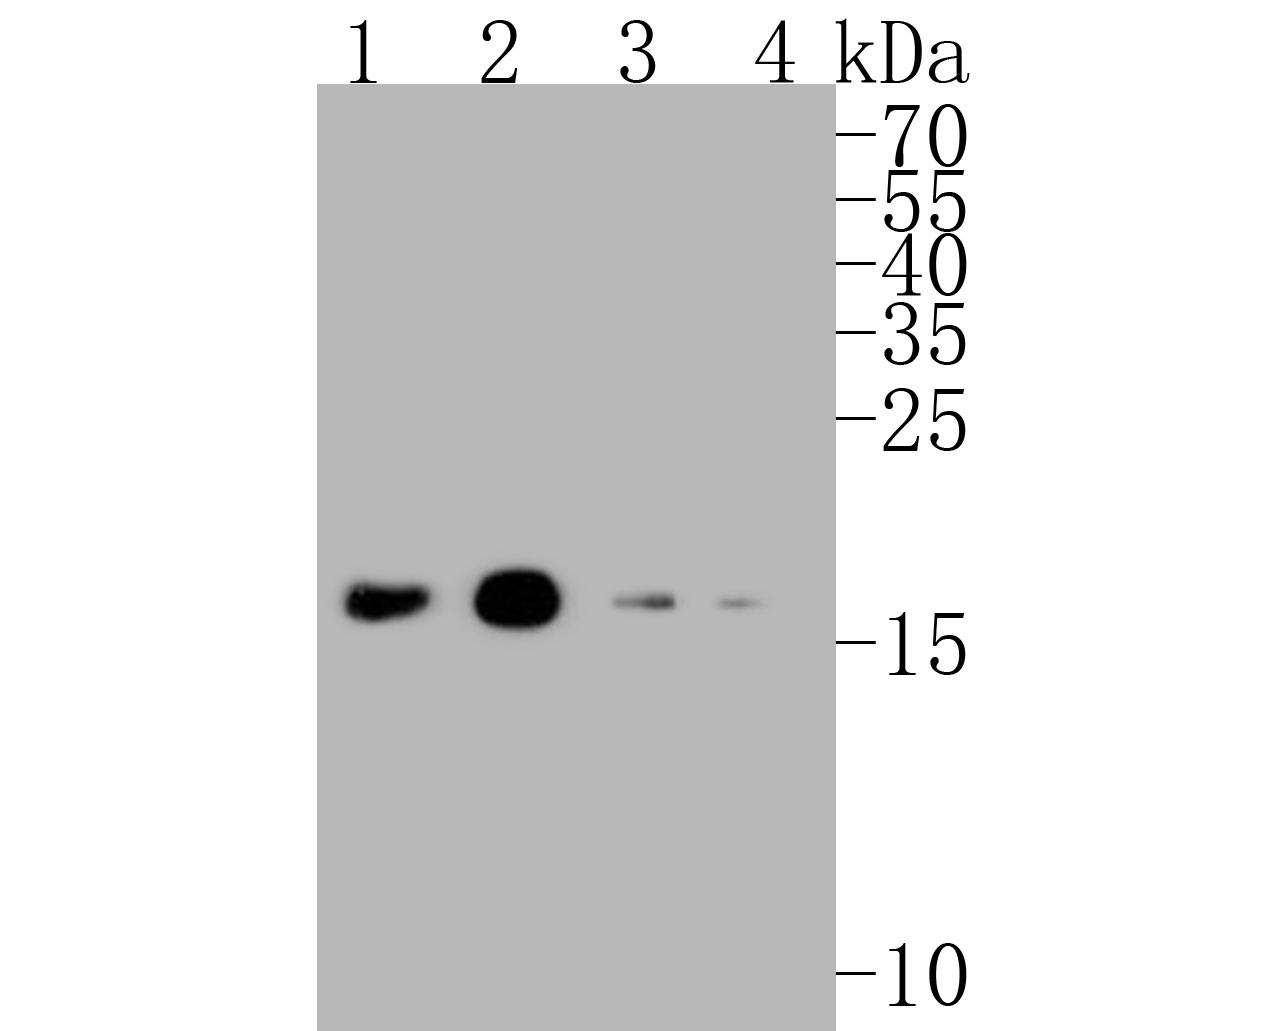 Immunocytochemistry analysis of SH-SY5Y cells labeling MAP1LC3A with Rabbit anti-MAP1LC3A antibody (ET1609-26) at 1/200 dilution.<br />
<br />
Cells were fixed in 4% paraformaldehyde for 10 minutes at 37 ℃, permeabilized with 0.05% Triton X-100 in PBS for 20 minutes, and then blocked with 2% negative goat serum for 30 minutes at room temperature. Cells were then incubated with Rabbit anti-MAP1LC3A antibody (ET1609-26) at 1/200 dilution in 2% negative goat serum overnight at 4 ℃. Goat Anti-Rabbit IgG H&L (iFluor™ 488, HA1121) was used as the secondary antibody at 1/1,000 dilution. Nuclear DNA was labelled in blue with DAPI.<br />
<br />
Beta tubulin (M1305-2, red) was stained at 1/100 dilution overnight at +4℃. Goat Anti-Mouse IgG H&L (iFluor™ 594, HA1126) was used as the secondary antibody at 1/1,000 dilution.